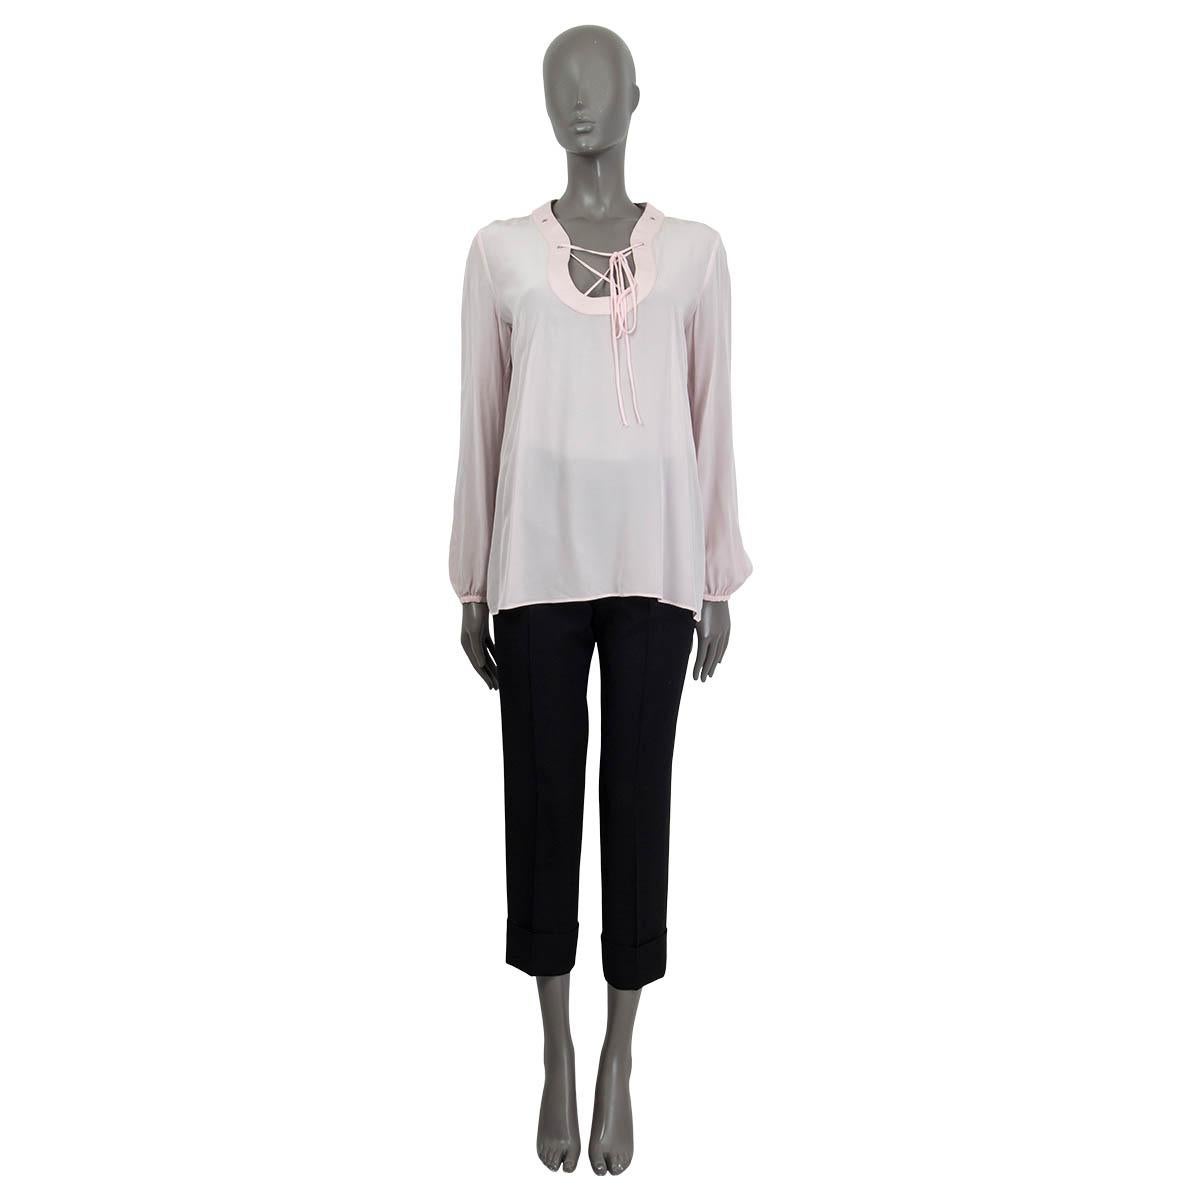 100% authentic Emilio Pucci lace-up blouse in light pink silk (100% please note the content tag is missing). Features a leather collar and buttoned sleeves. Unlined. Has a barely visible yellow stain at the front, otherwise in excellent